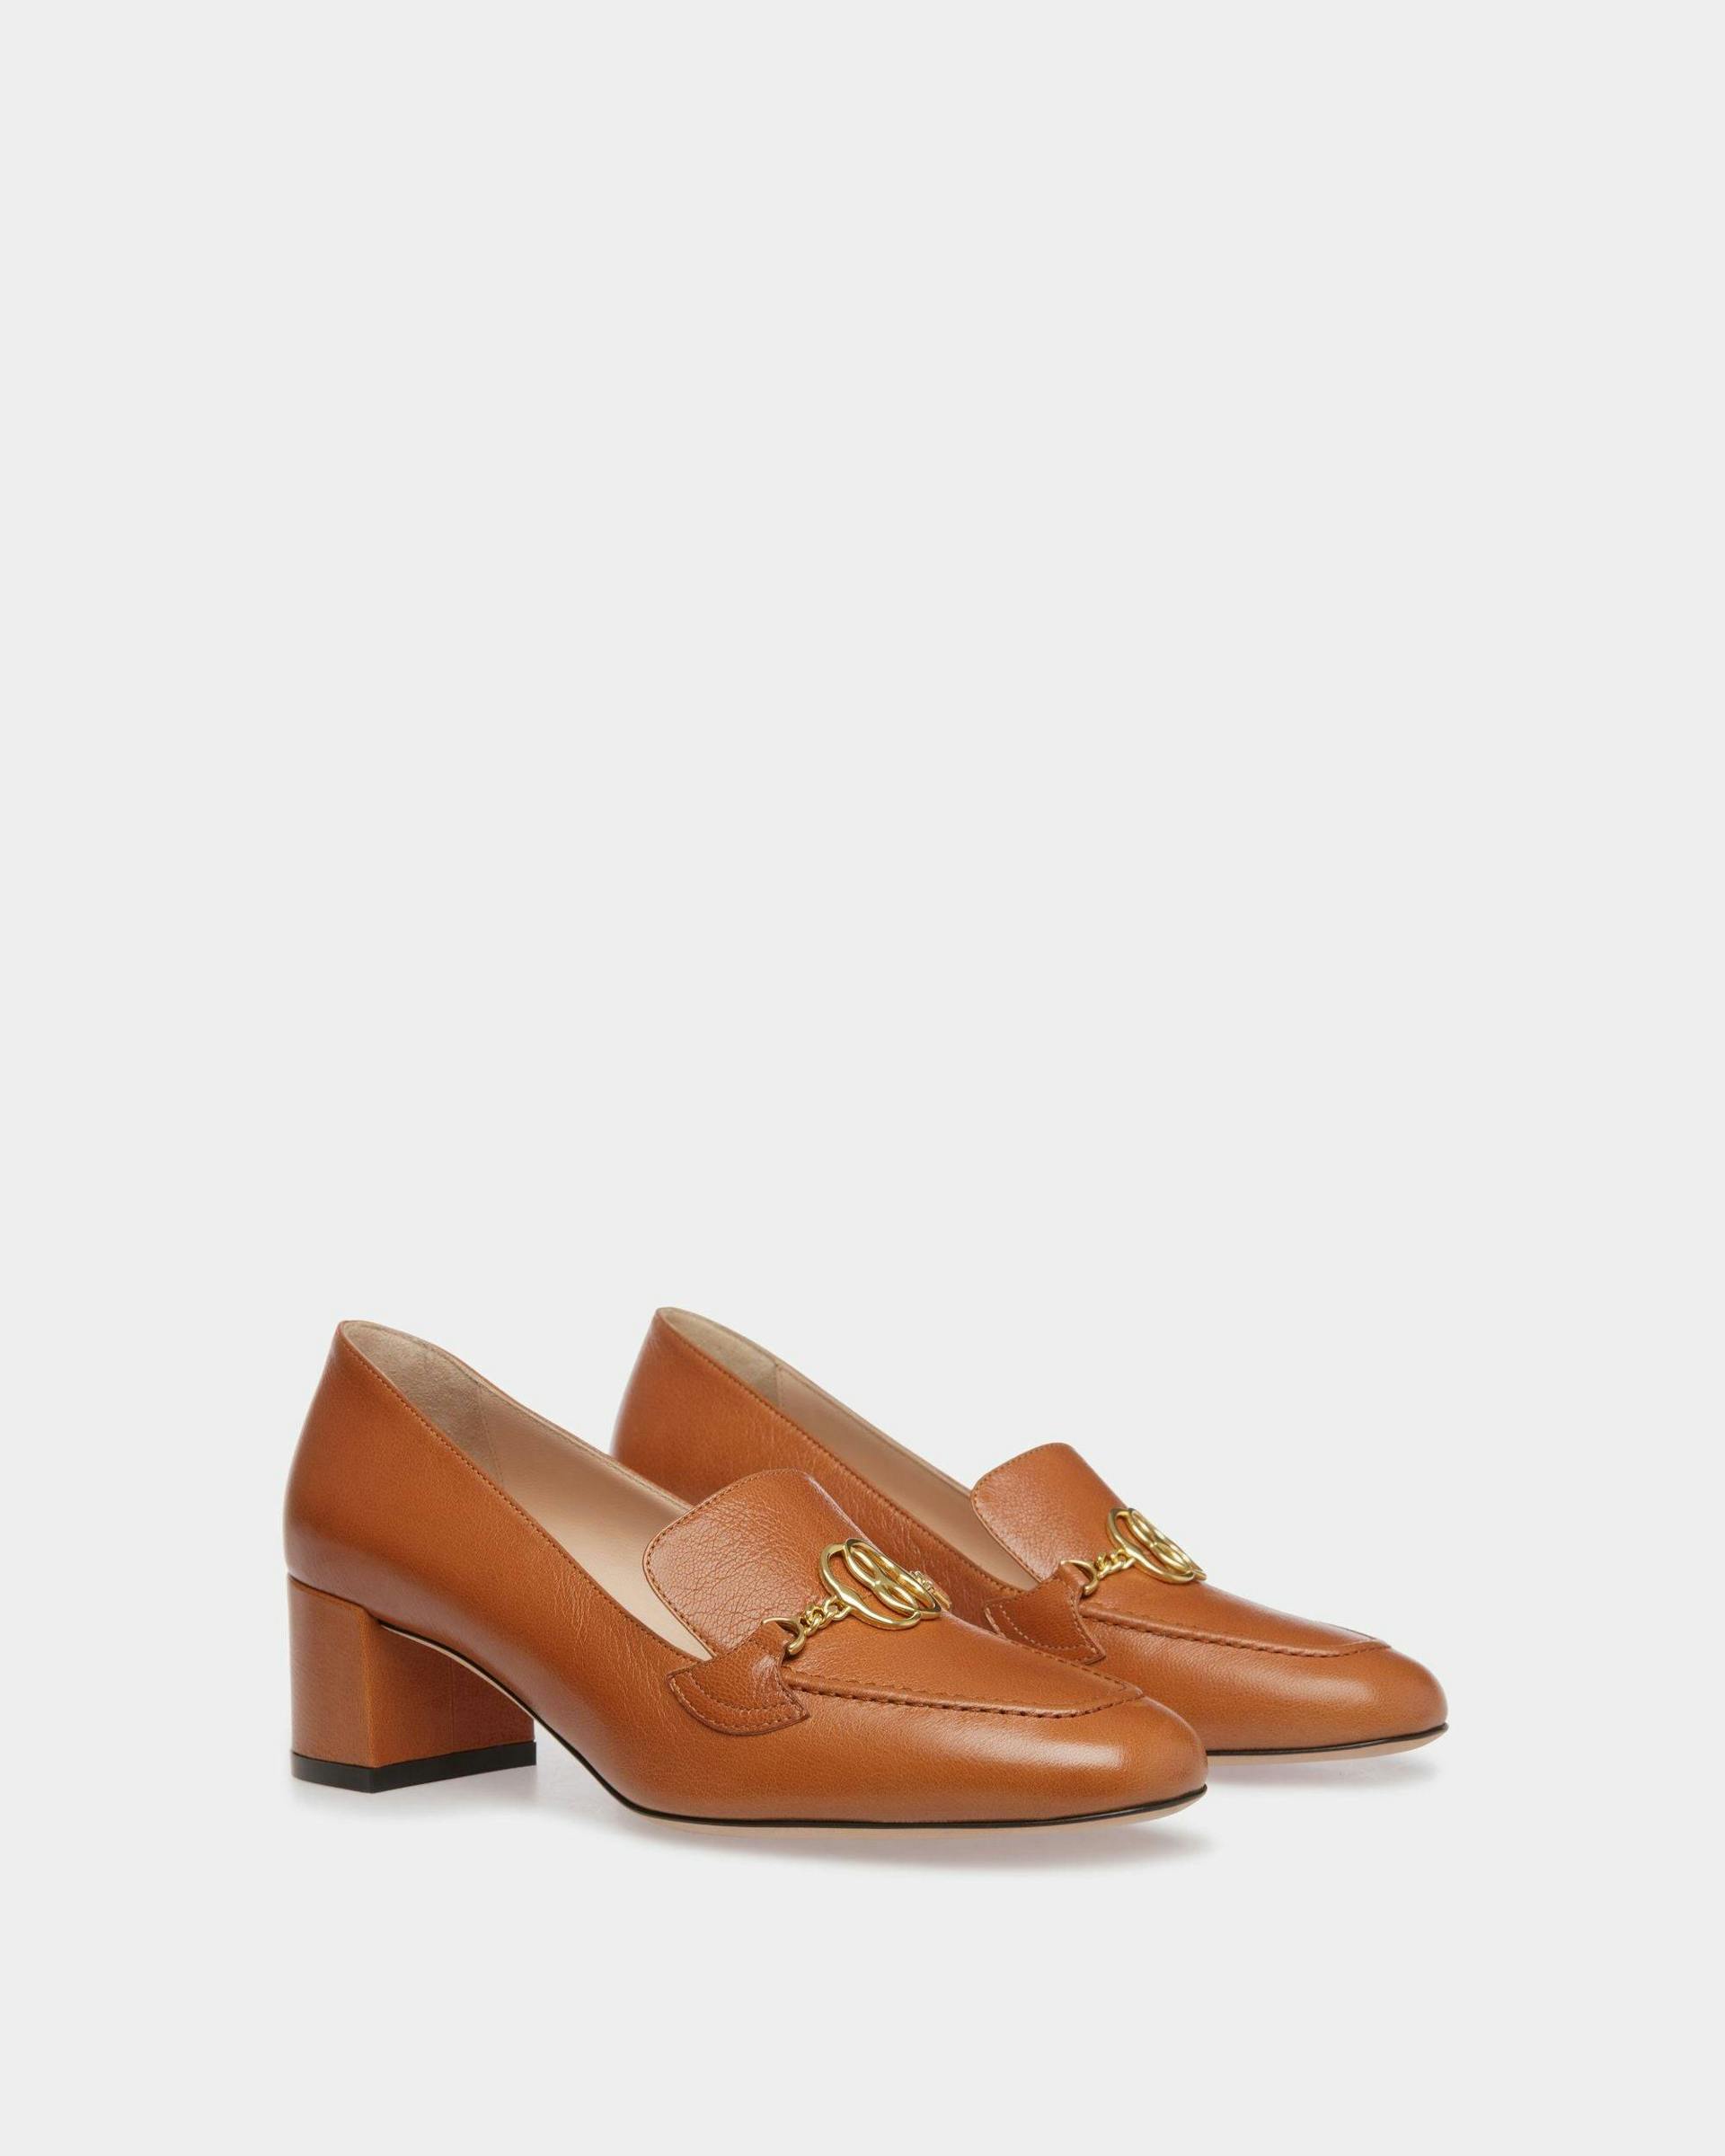 Women's Emblem Pumps In Brown Leather | Bally | Still Life 3/4 Front